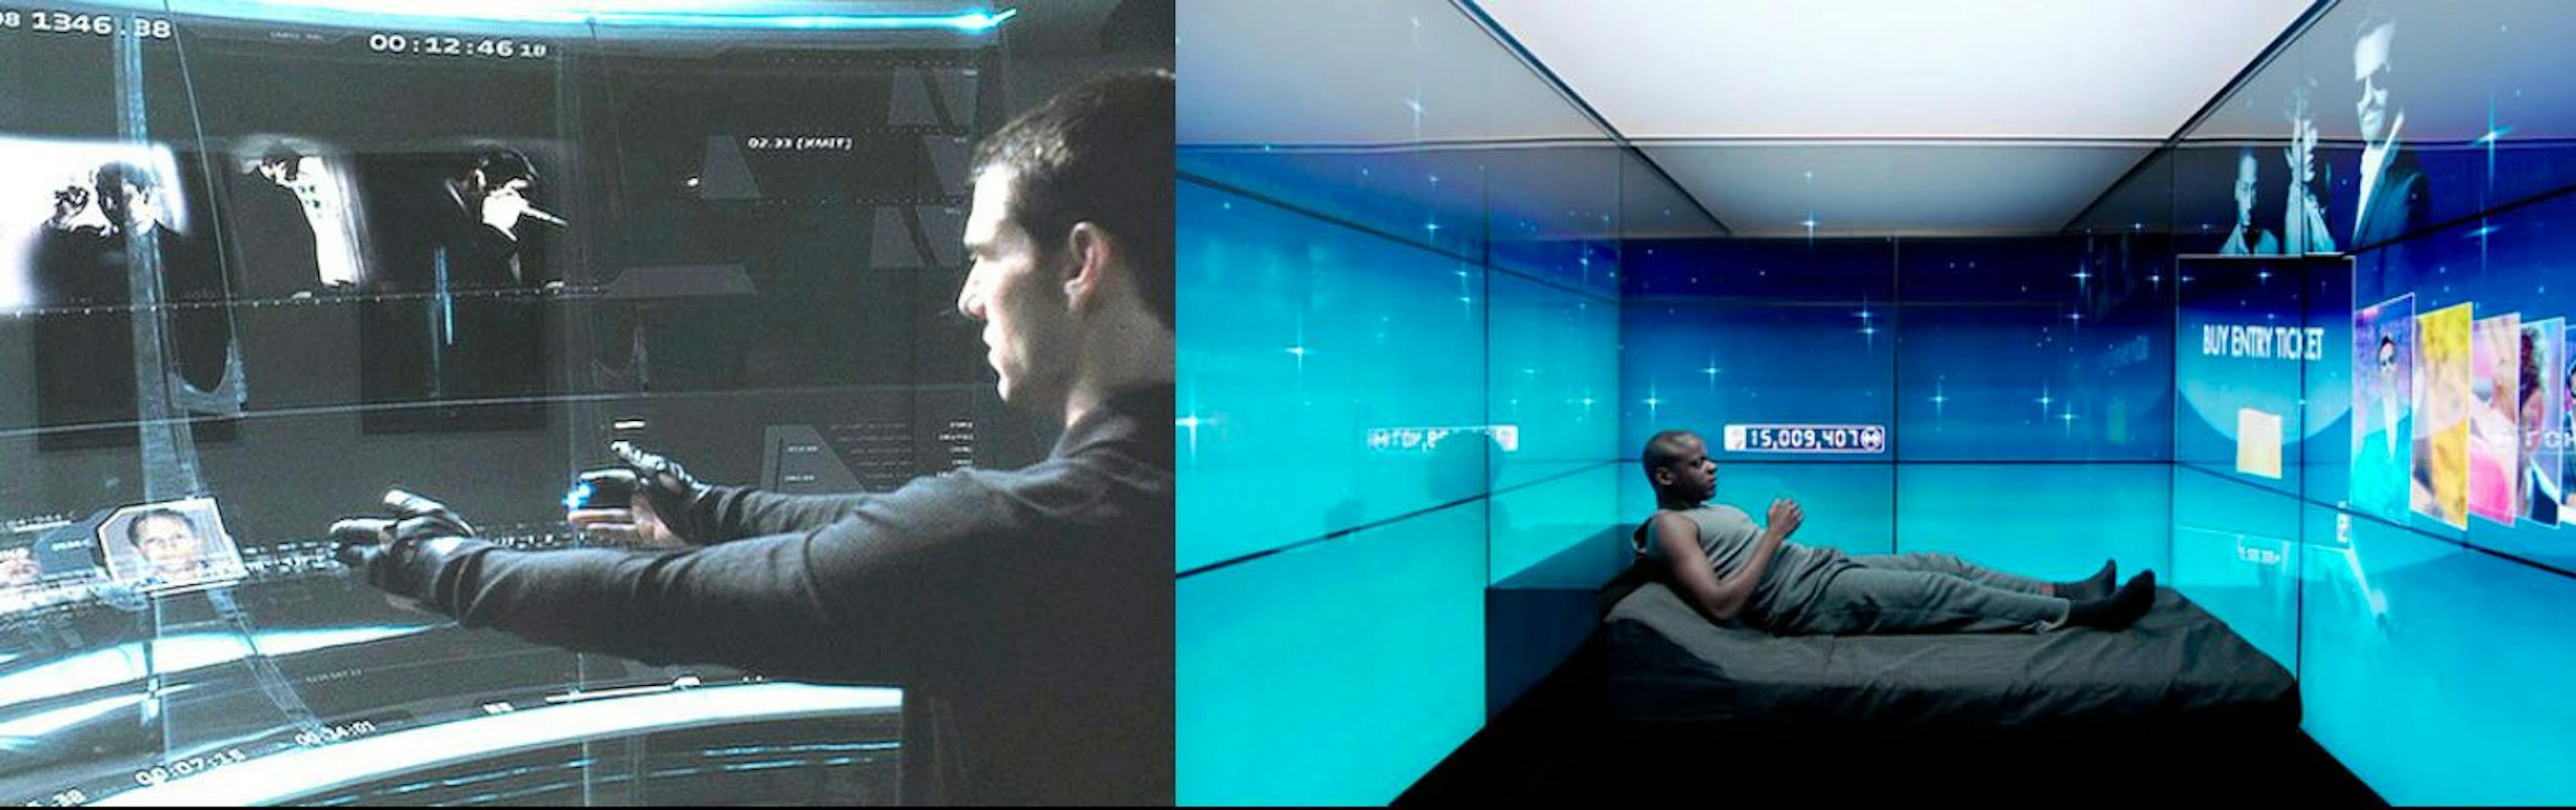 Minority Report and Black Mirror demonstrated gesture interfaces 